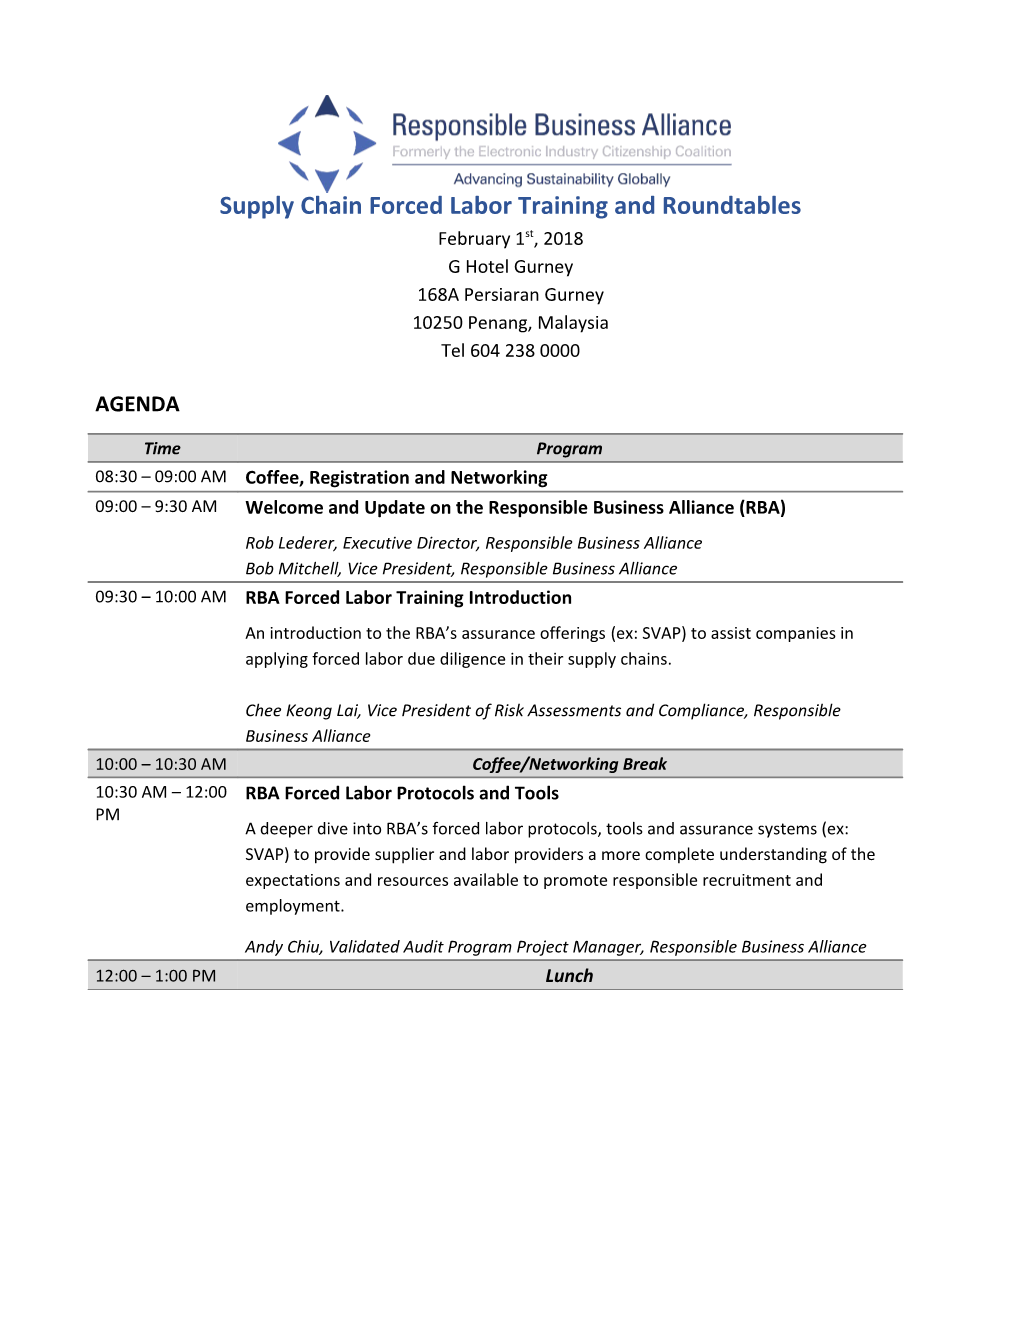 Supply Chain Forced Labor Training and Roundtables